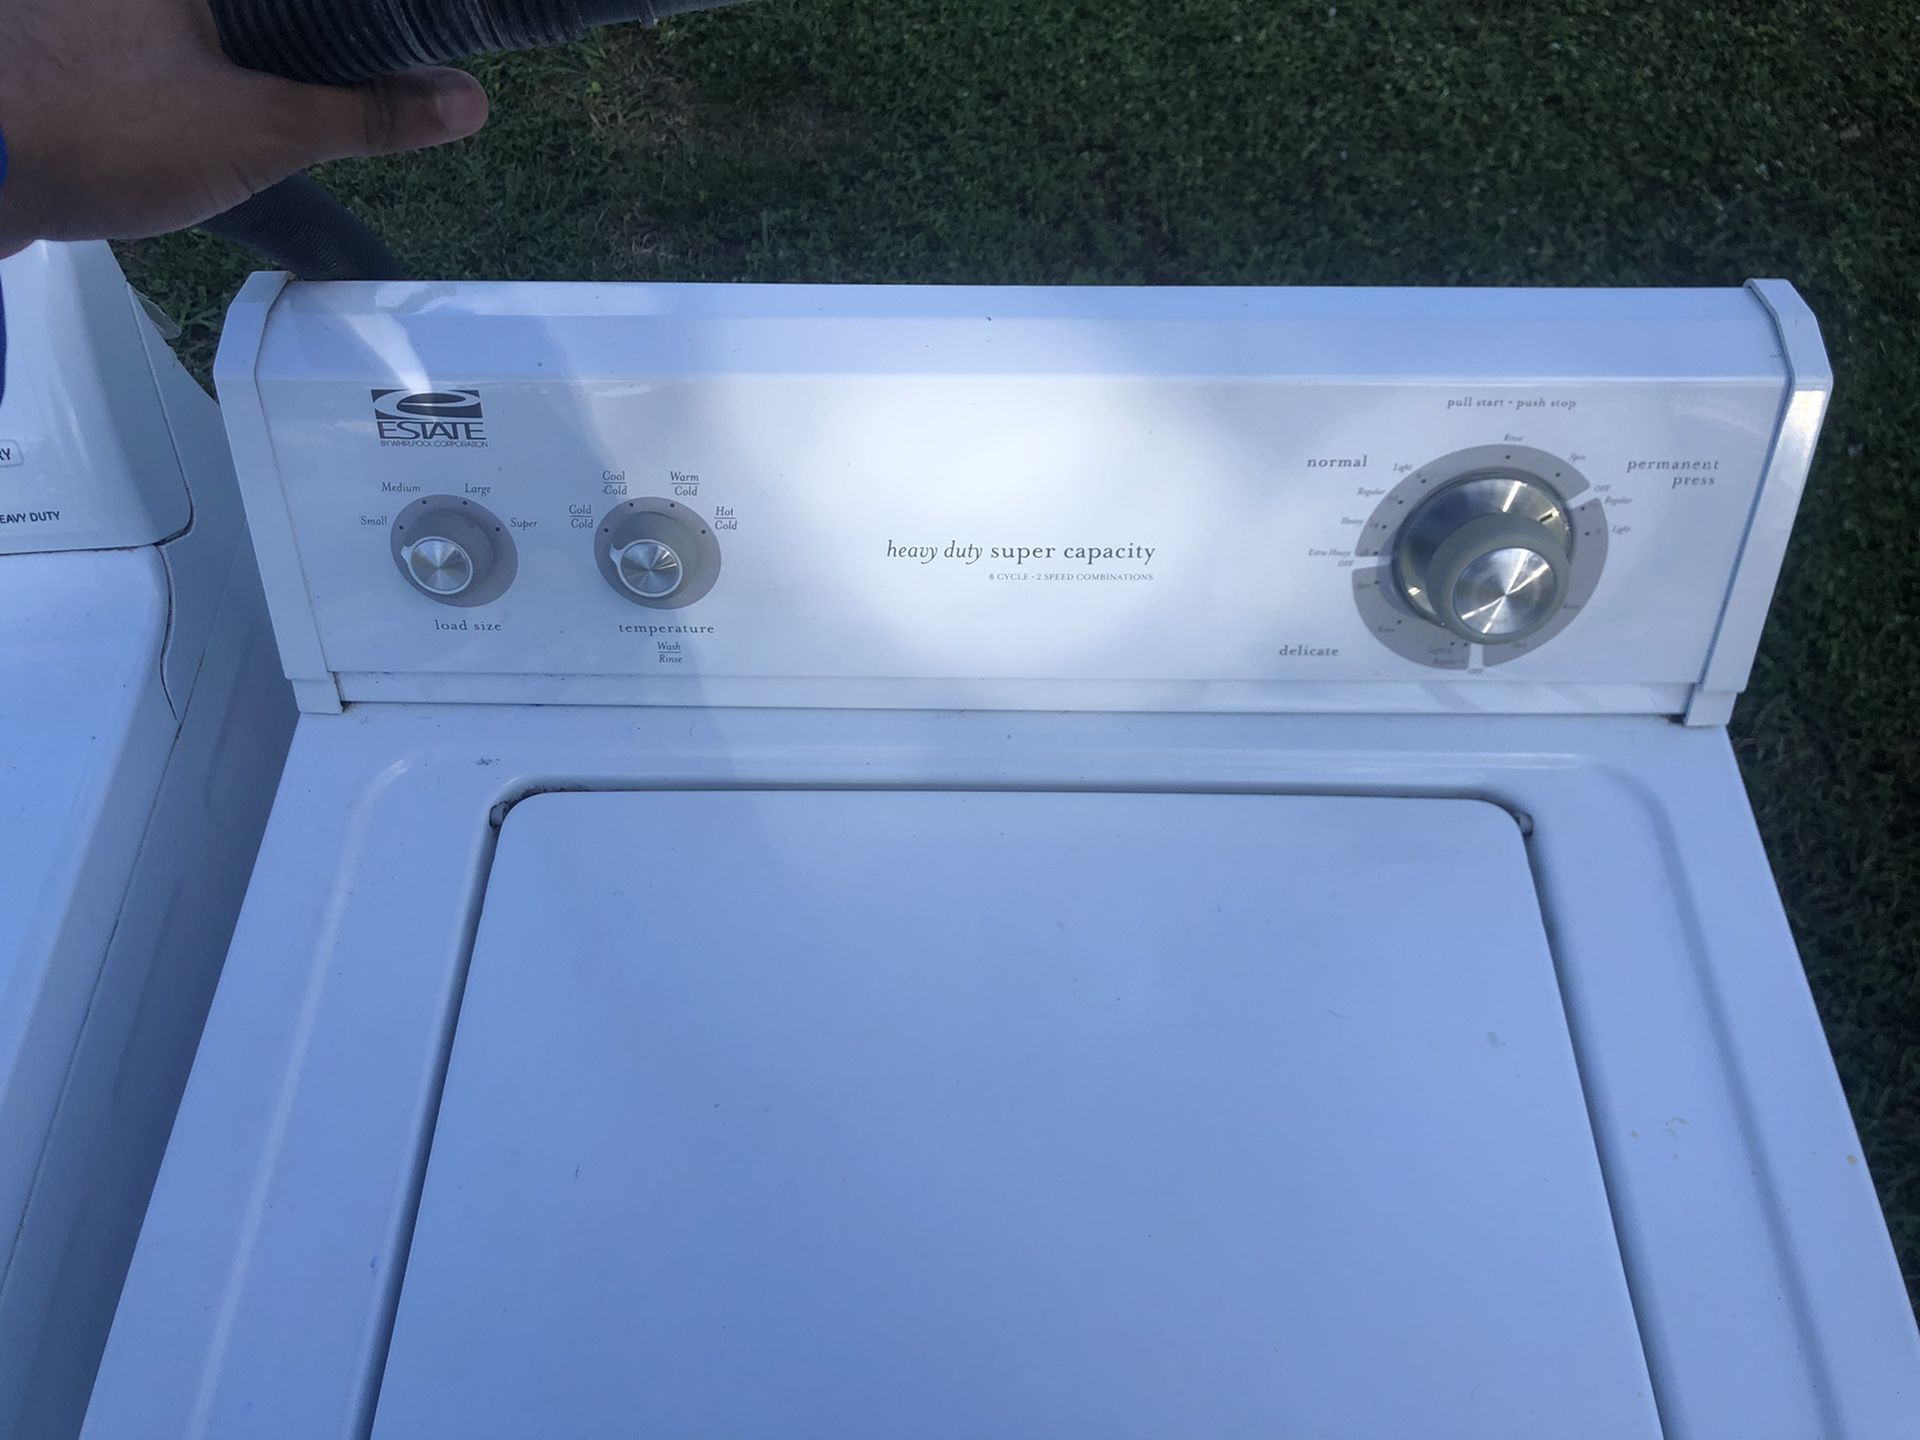 Washer and dryer for sale!!!